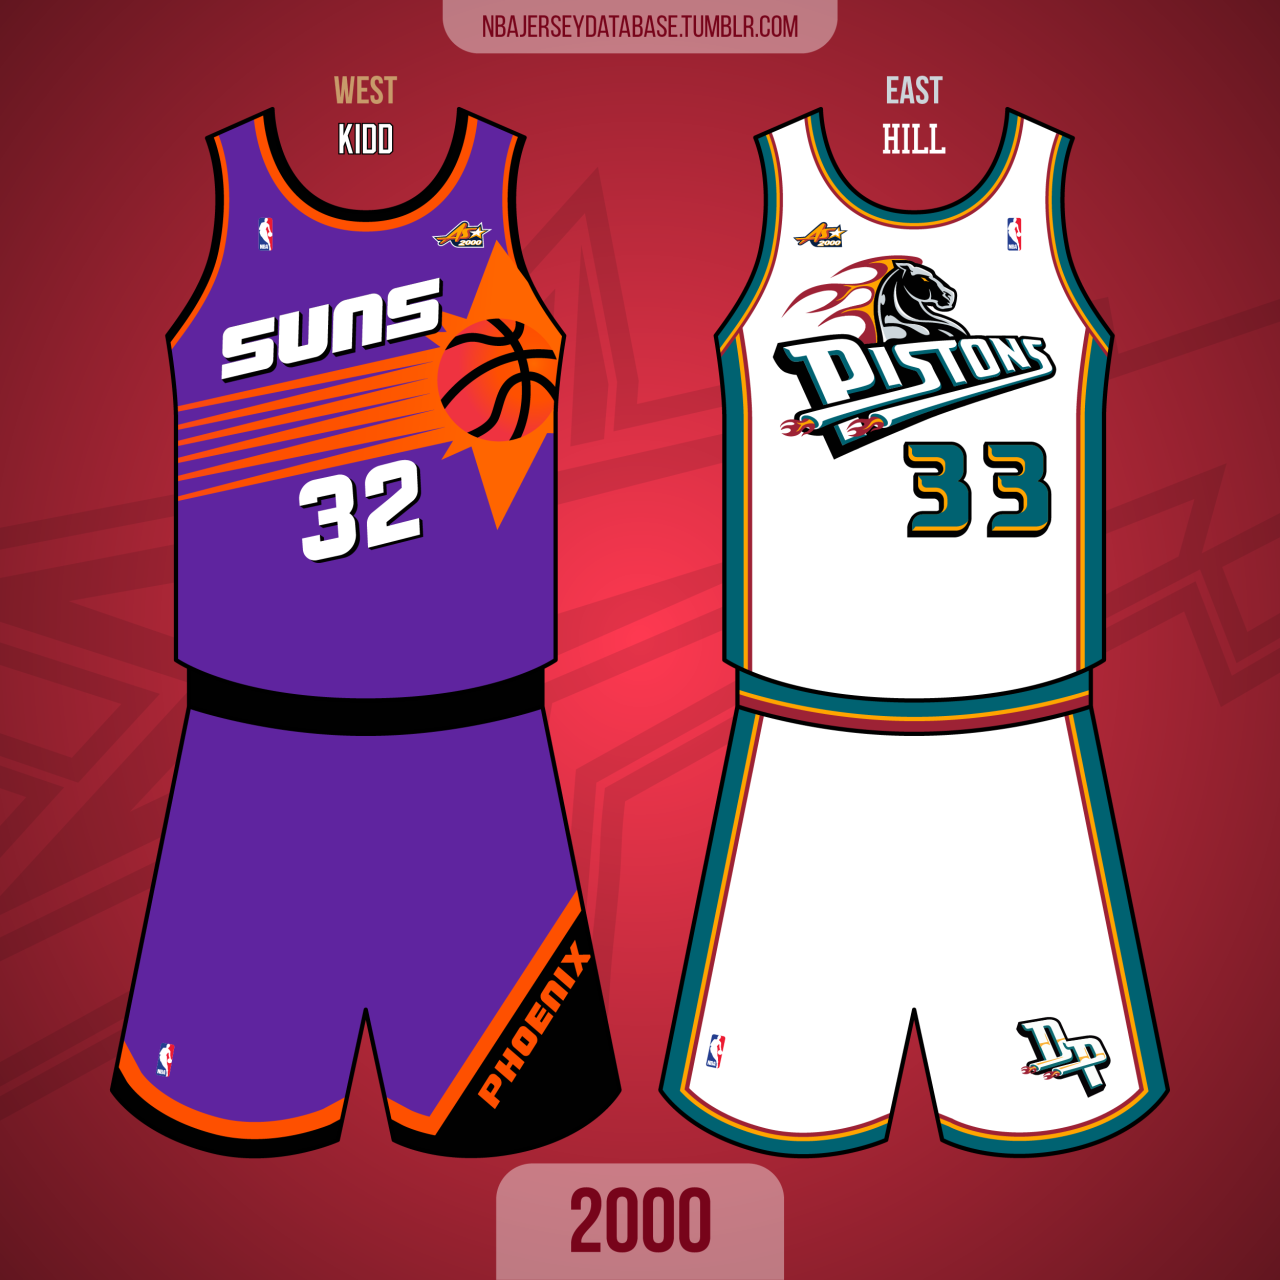 NBA Jersey Database, 2000 NBA All-Star Game Oakland Arena East 126